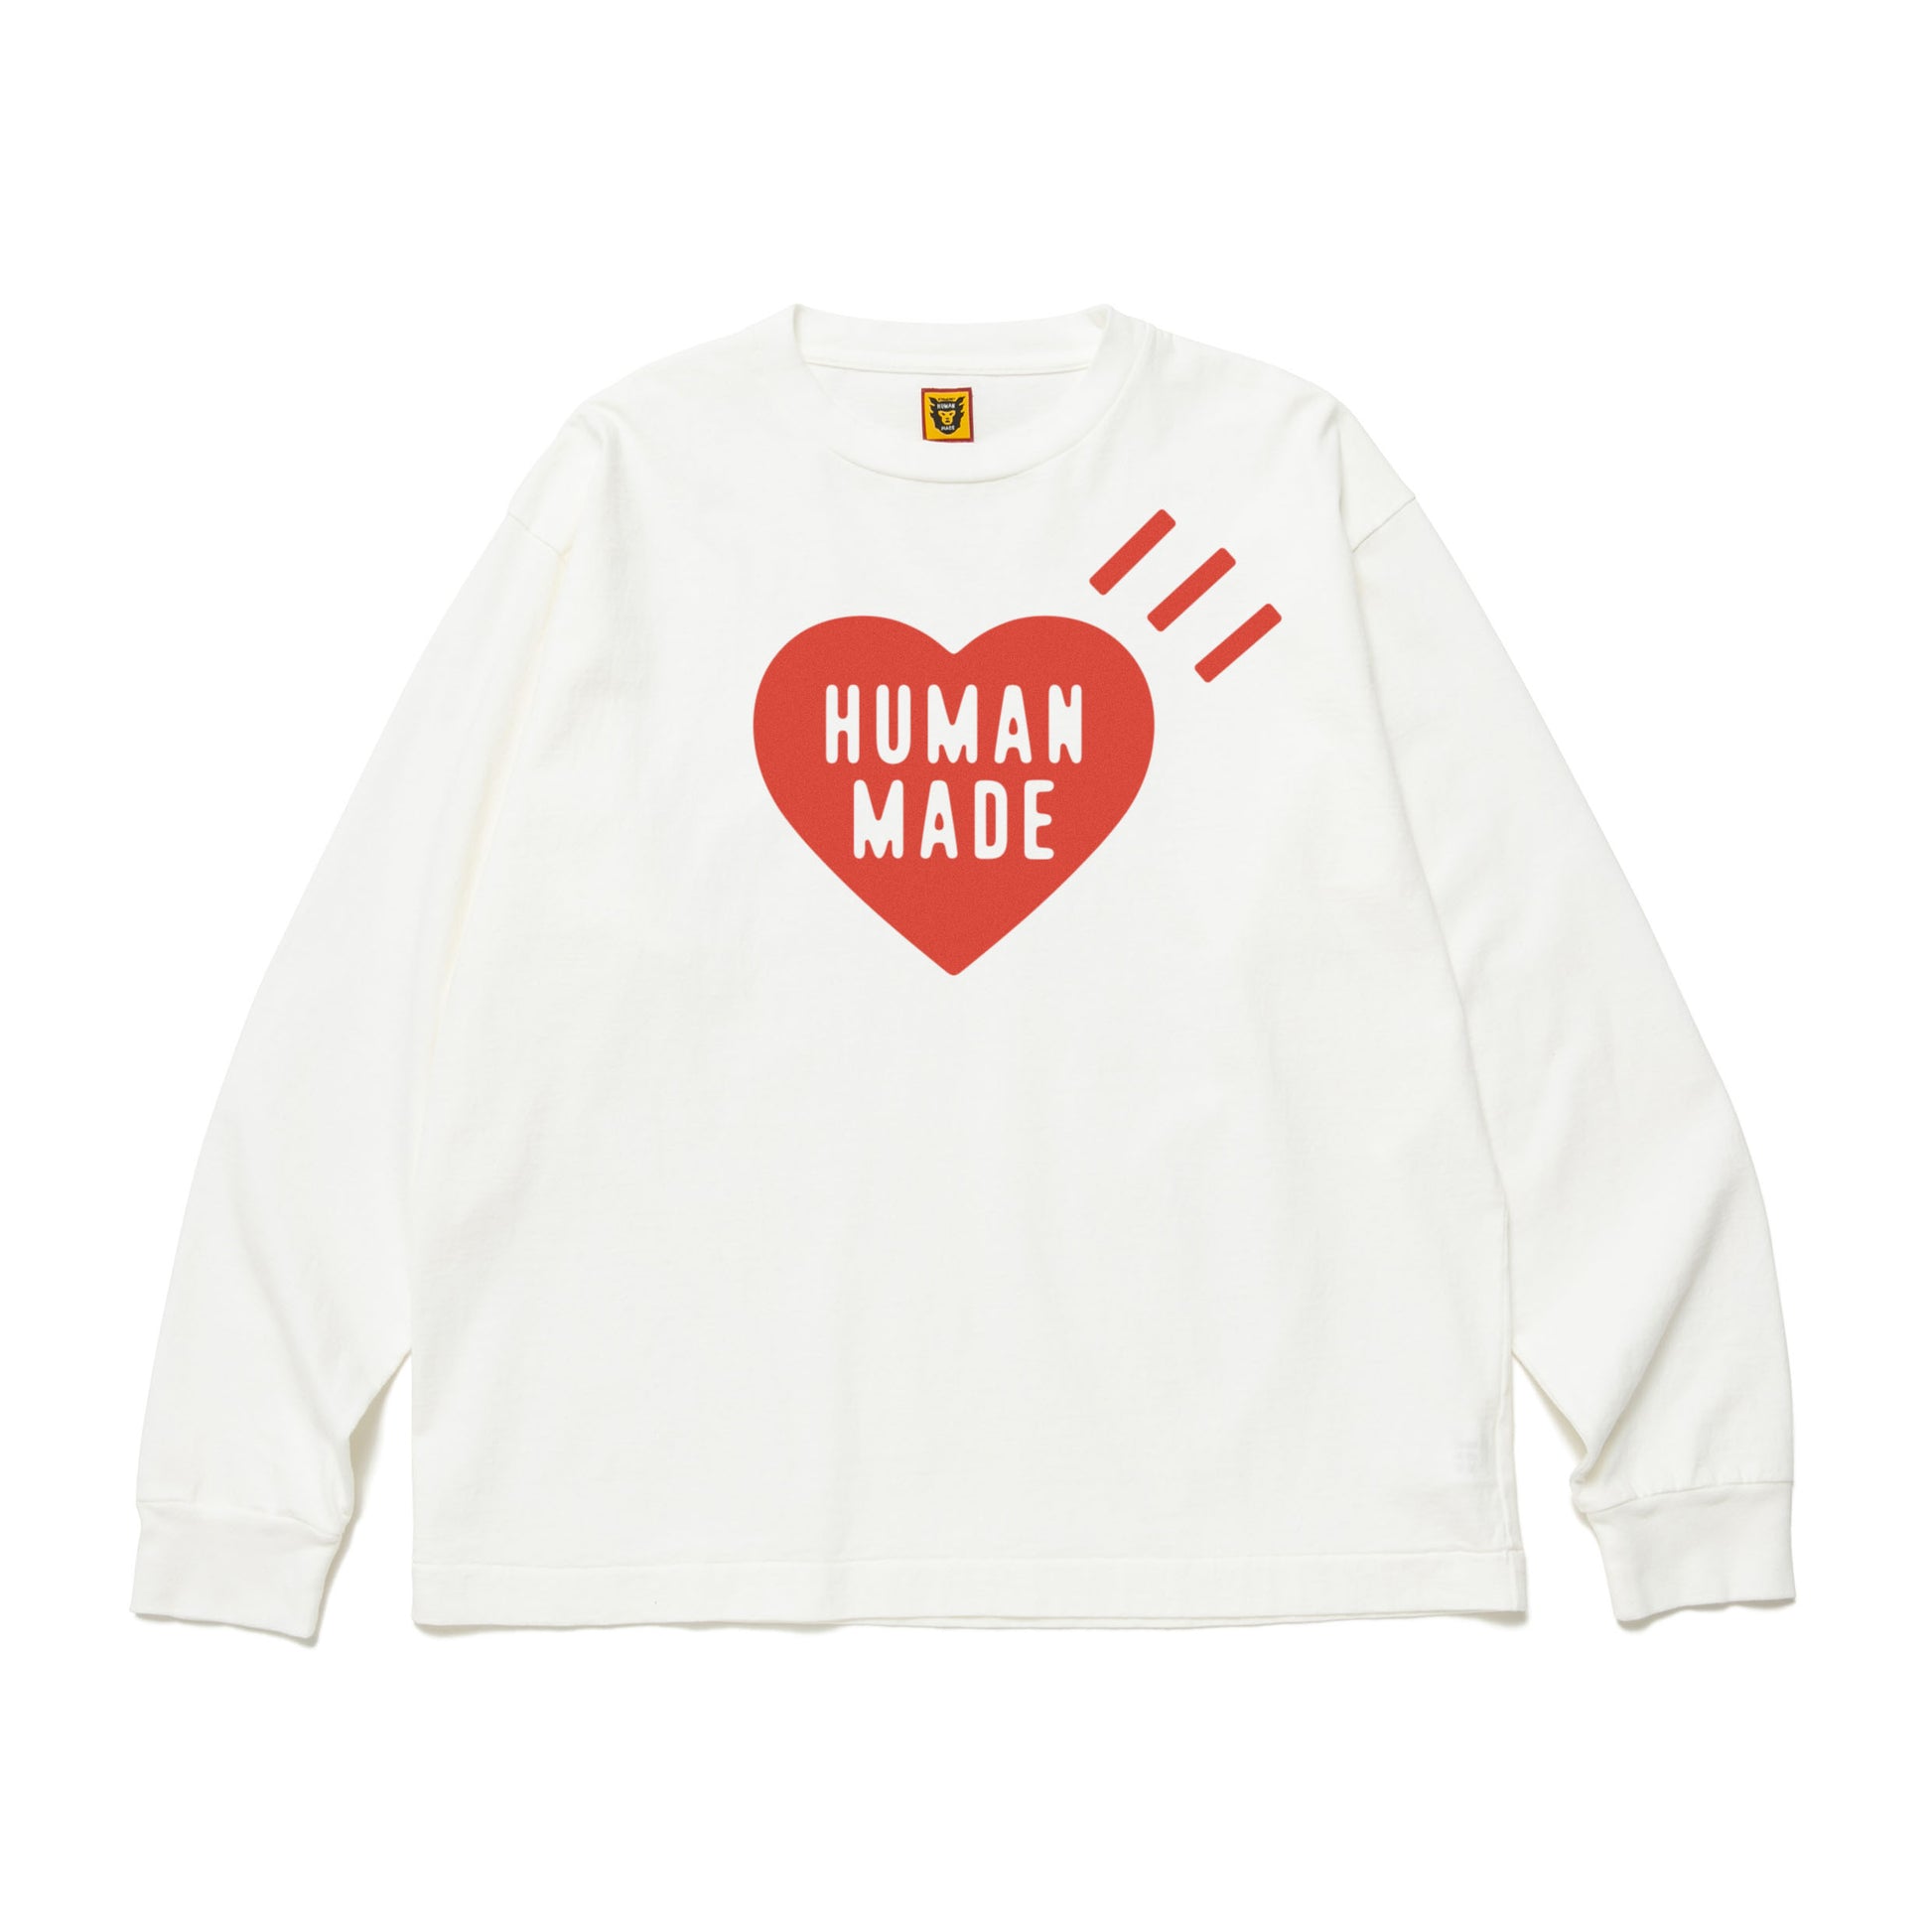 DAILY L/S T-SHIRT #261228 – HUMAN MADE ONLINE STORE